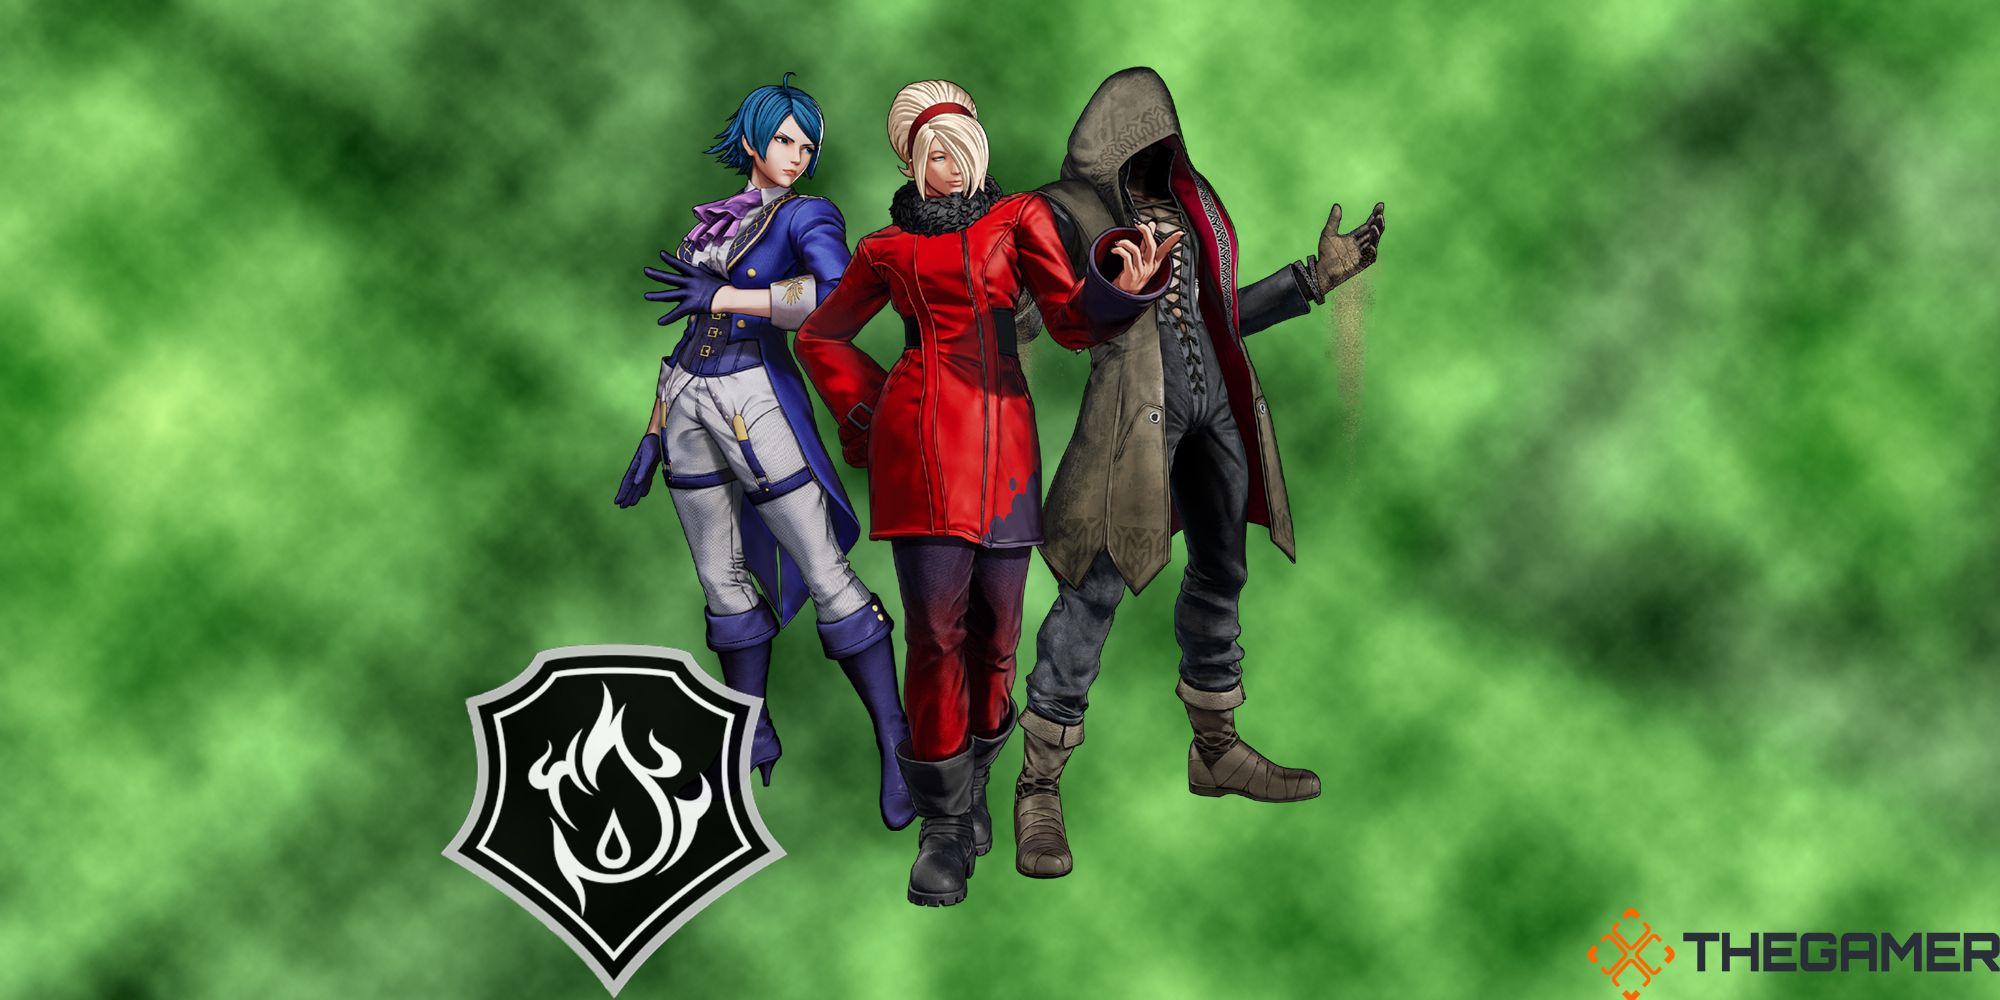 Elisabeth Blanctorche, Ash Crimson, and Kukri stand against a cloudy green background with the Team Ash crest in the foreground. Custom Image. The King Of Fighters 15.